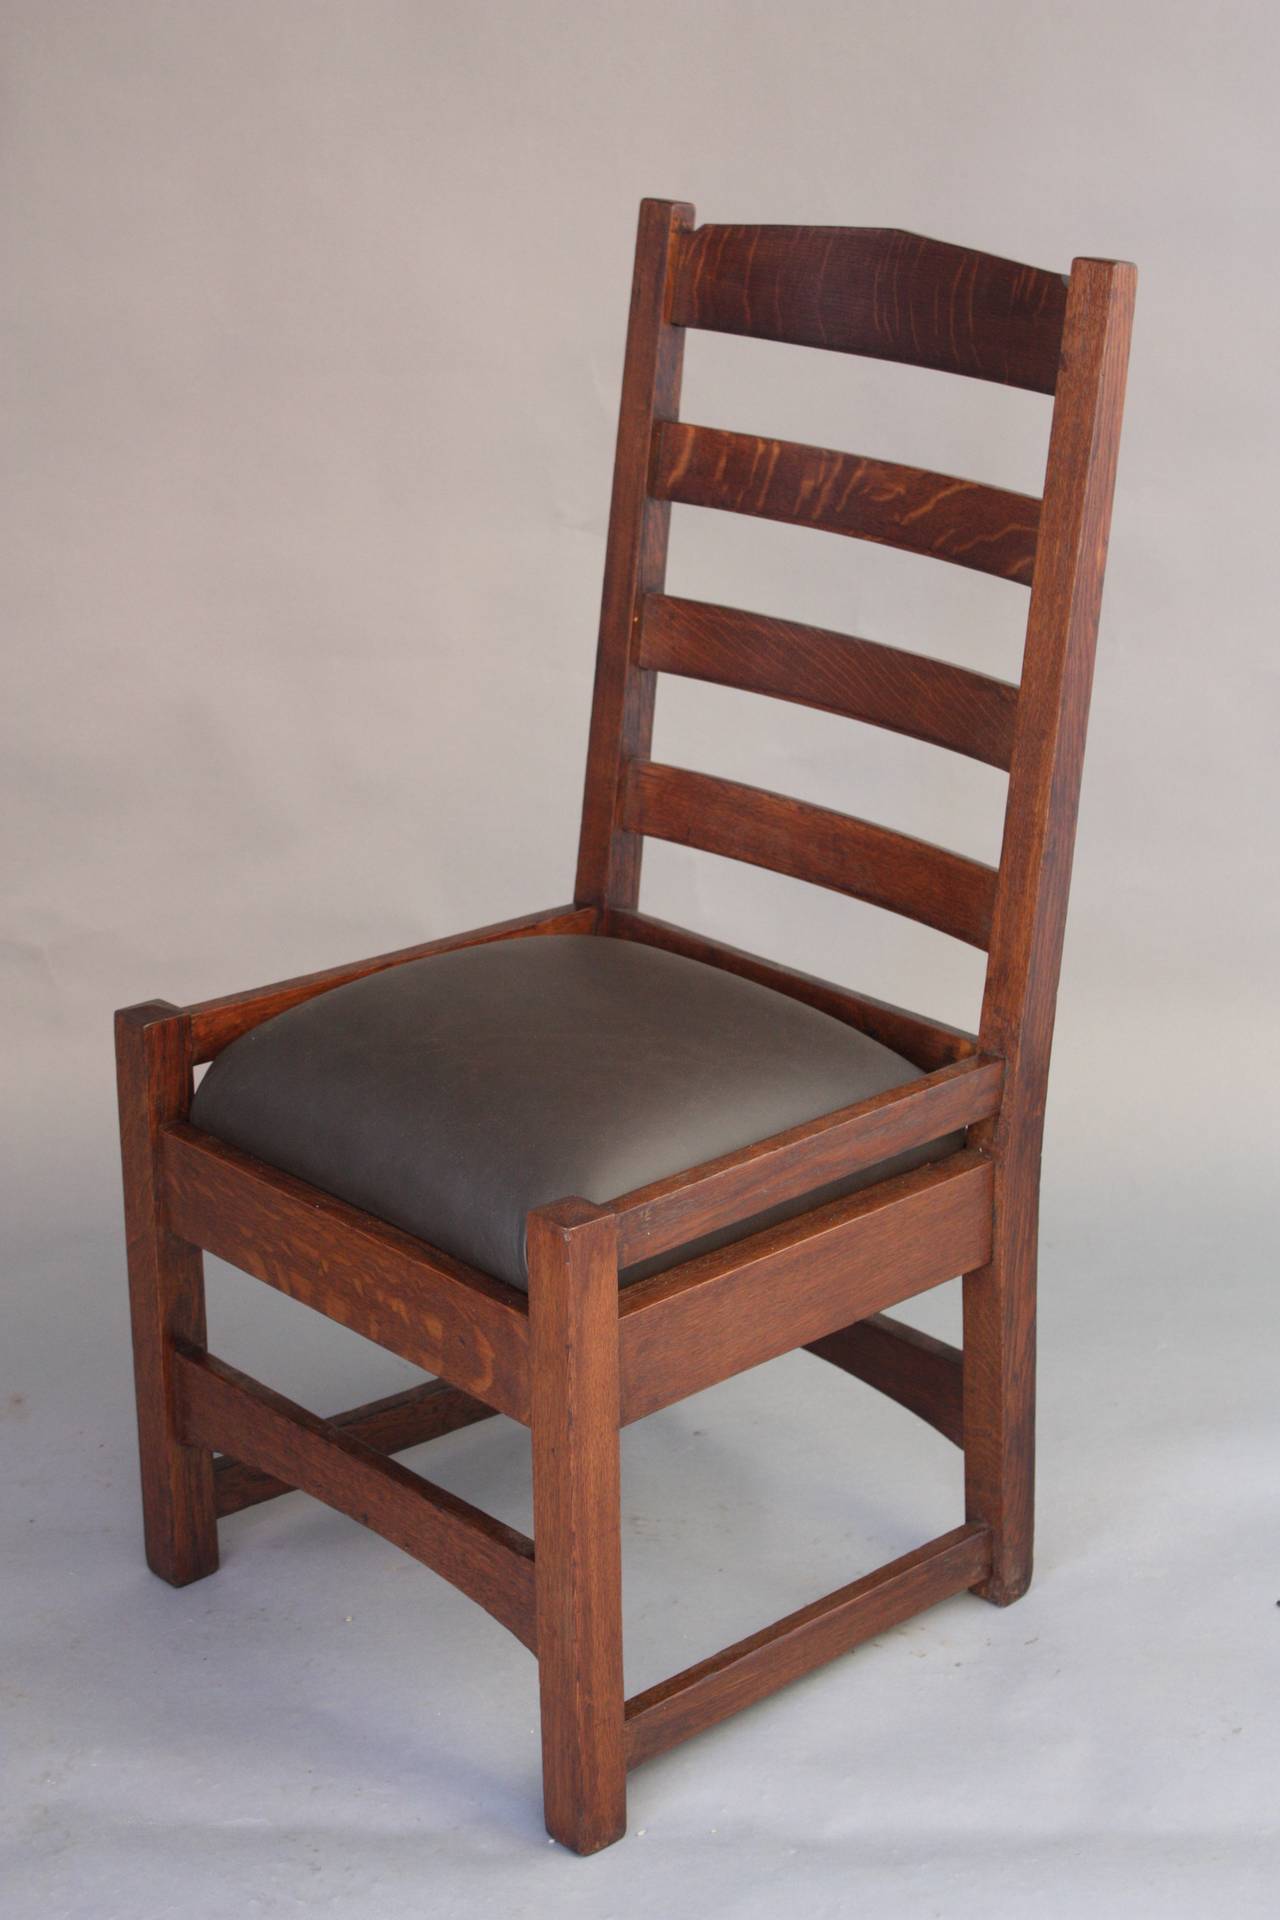 Classic arts and crafts side chair with ladder back. Beautiful quarter sawn oak. New dark leather upholstery 36.75